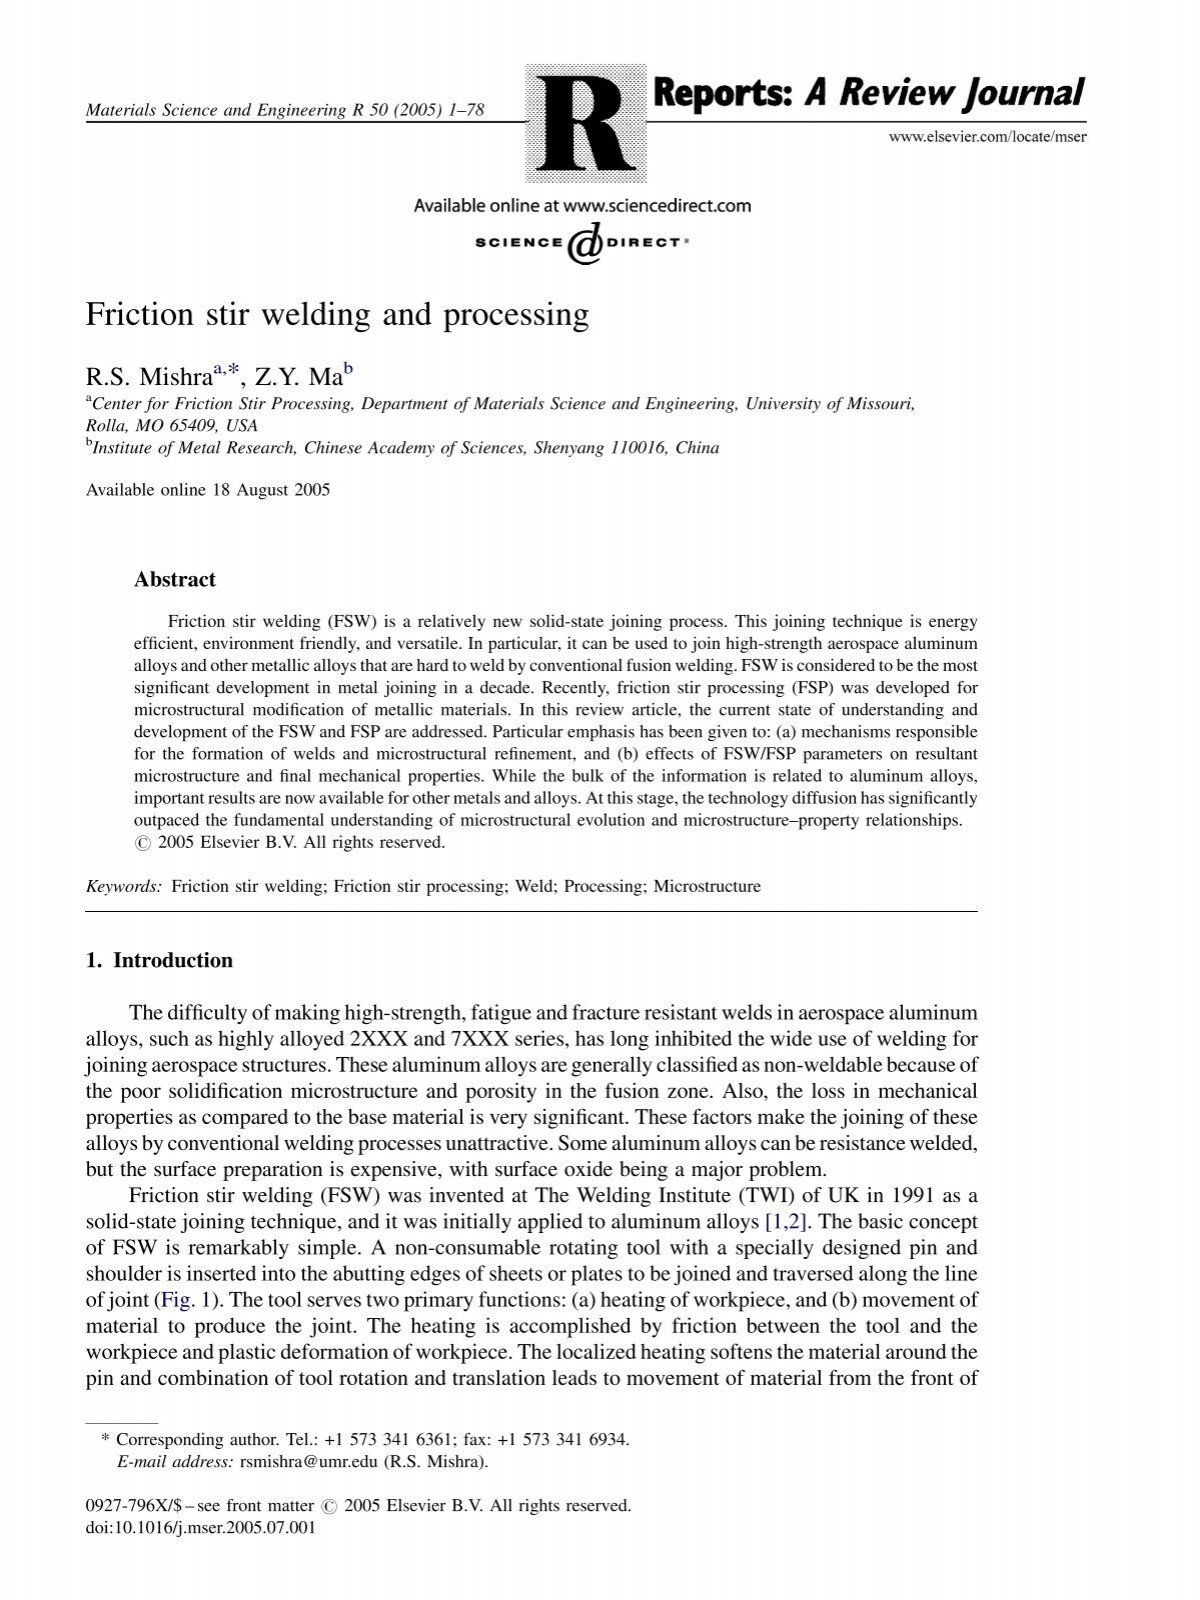 Properties and performance of welded or bonded seams - ScienceDirect